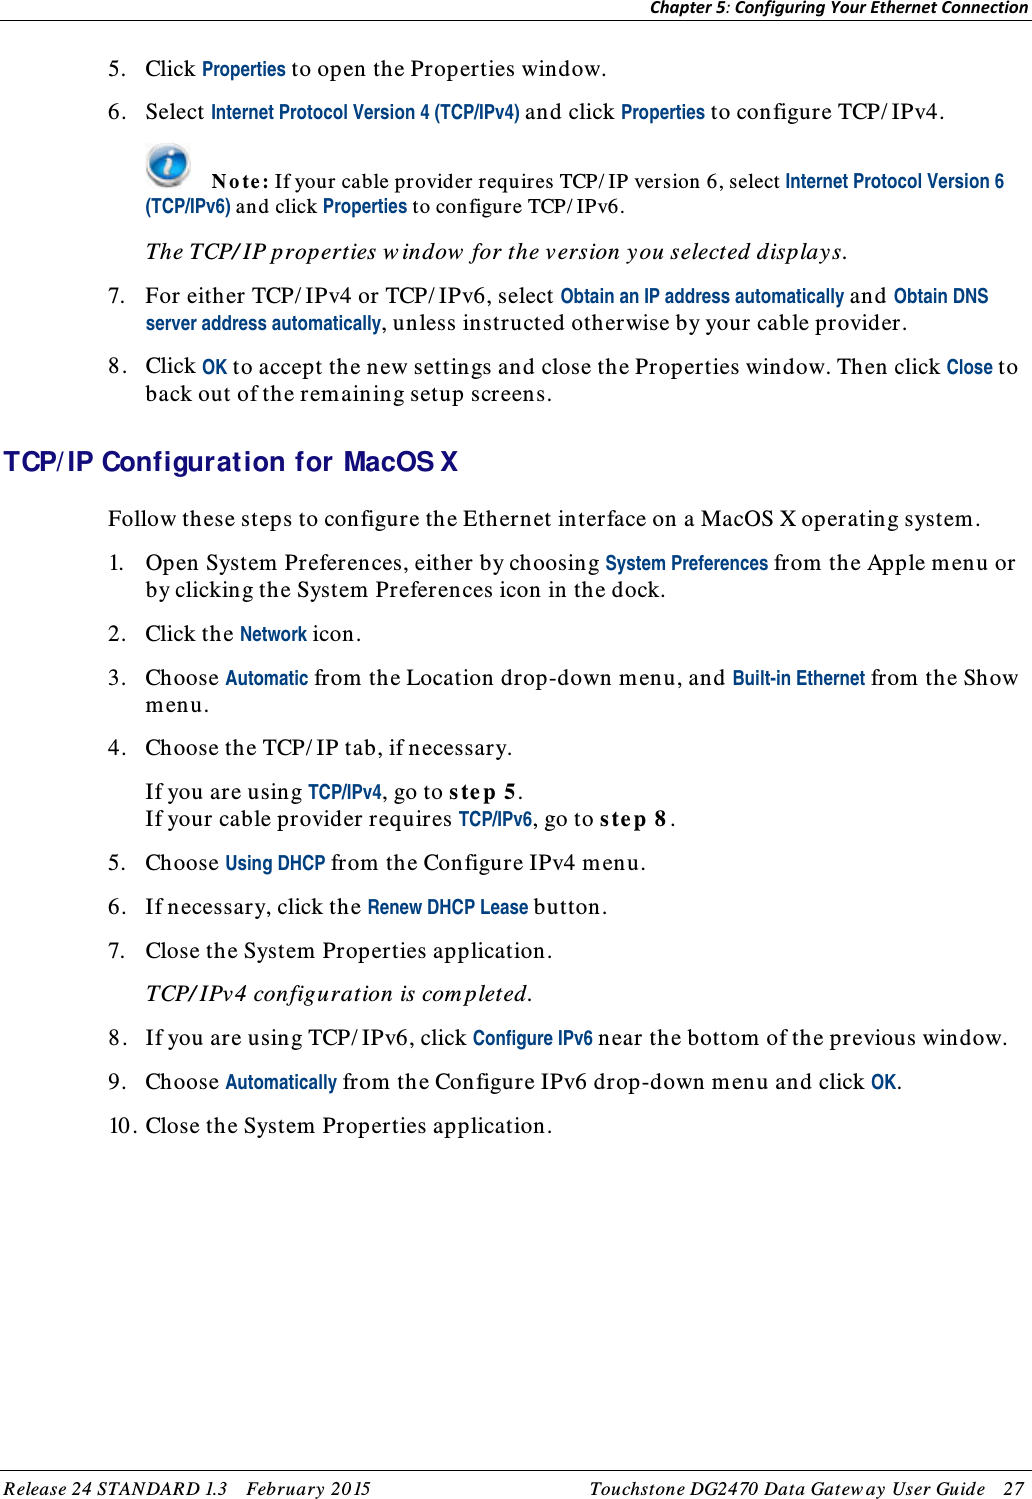 Chapter 5: Configuring Your Ethernet Connection  5. Click Properties to open the Properties window. 6. Select Internet Protocol Version 4 (TCP/IPv4) and click Properties to configure TCP/ IPv4.  N o te : If your cable provider requires TCP/ IP version 6, select Internet Protocol Version 6 (TCP/IPv6) and click Properties to configure TCP/ IPv6. The TCP/ IP properties w indow  for the version y ou selected display s. 7. For either TCP/ IPv4 or TCP/ IPv6, select Obtain an IP address automatically and Obtain DNS server address automatically, unless instructed otherwise by your cable provider. 8. Click OK to accept the new settings and close the Properties window. Then click Close to back out of the rem aining setup screens.   TCP/ IP Configuration for MacOS X Follow these steps to configure the Ethernet interface on a MacOS X operating system . 1. Open System Preferences, either by choosing System Preferences from th e Apple menu or by clicking the System Preferences icon in th e dock. 2. Click the Network icon. 3. Choose Automatic from the Location drop-down menu, and Built-in Ethernet from  the Show menu. 4. Choose the TCP/ IP tab, if necessary. If you are using TCP/IPv4, go to s te p 5. If your cable provider requires TCP/IPv6, go to step 8 . 5. Choose Using DHCP from the Configure IPv4 menu. 6. If necessary, click the Renew DHCP Lease button. 7. Close the System Properties application. TCP/ IPv4 configuration is com pleted. 8. If you are using TCP/ IPv6, click Configure IPv6 near the bottom of the previous window. 9. Choose Automatically from the Configure IPv6 drop-down menu and click OK. 10 . Close the System  Properties application.  Release 24 STANDAR D 1.3    February  20 15 Touchstone DG2470  Data Gatew ay  User Guide    27  